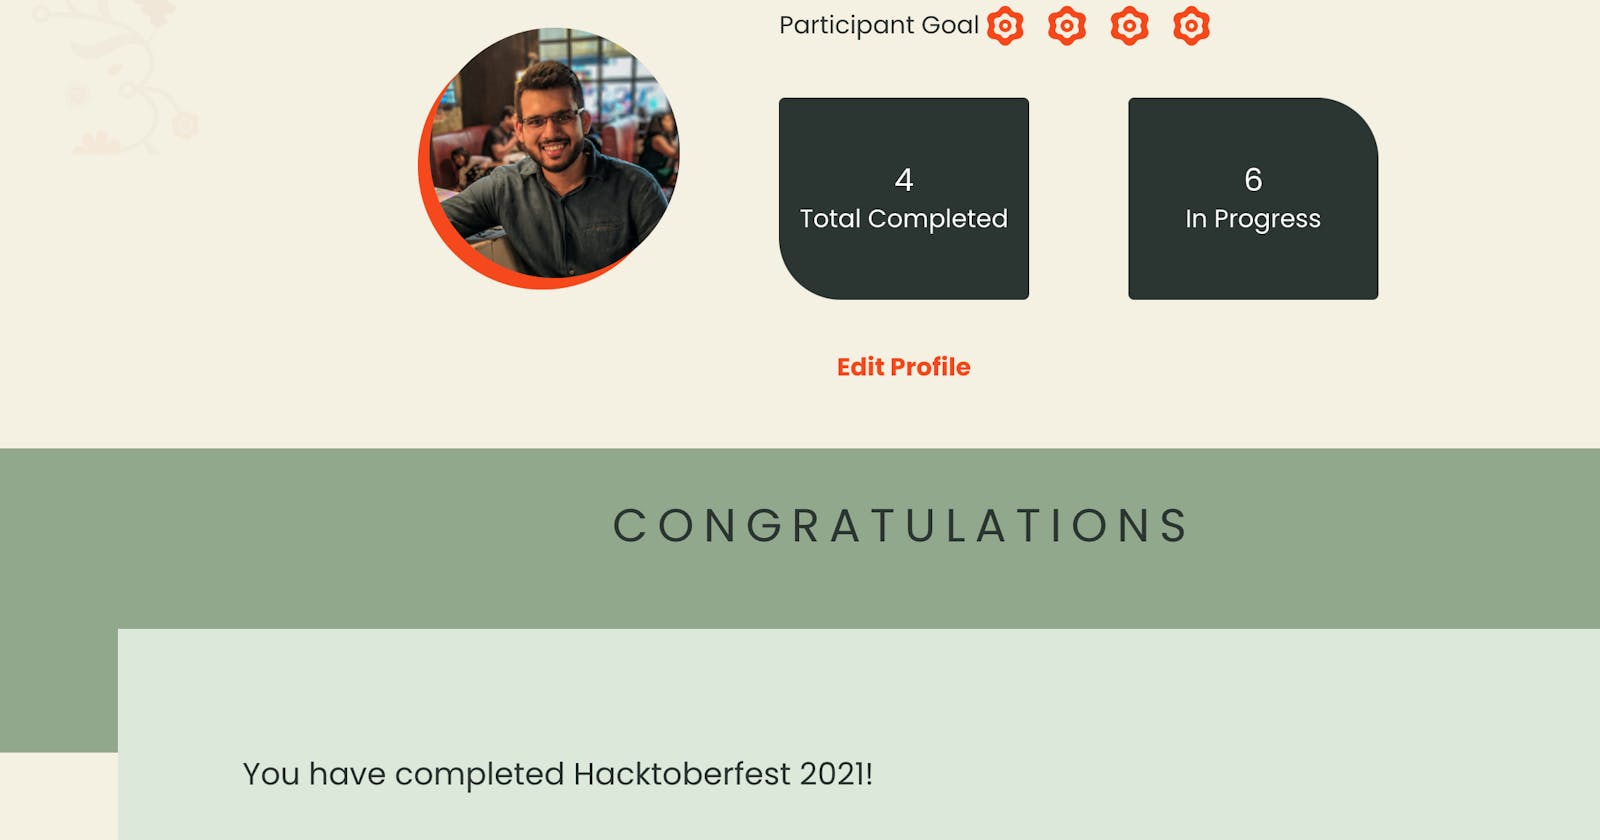 A structured approach to Hacktoberfest 2021